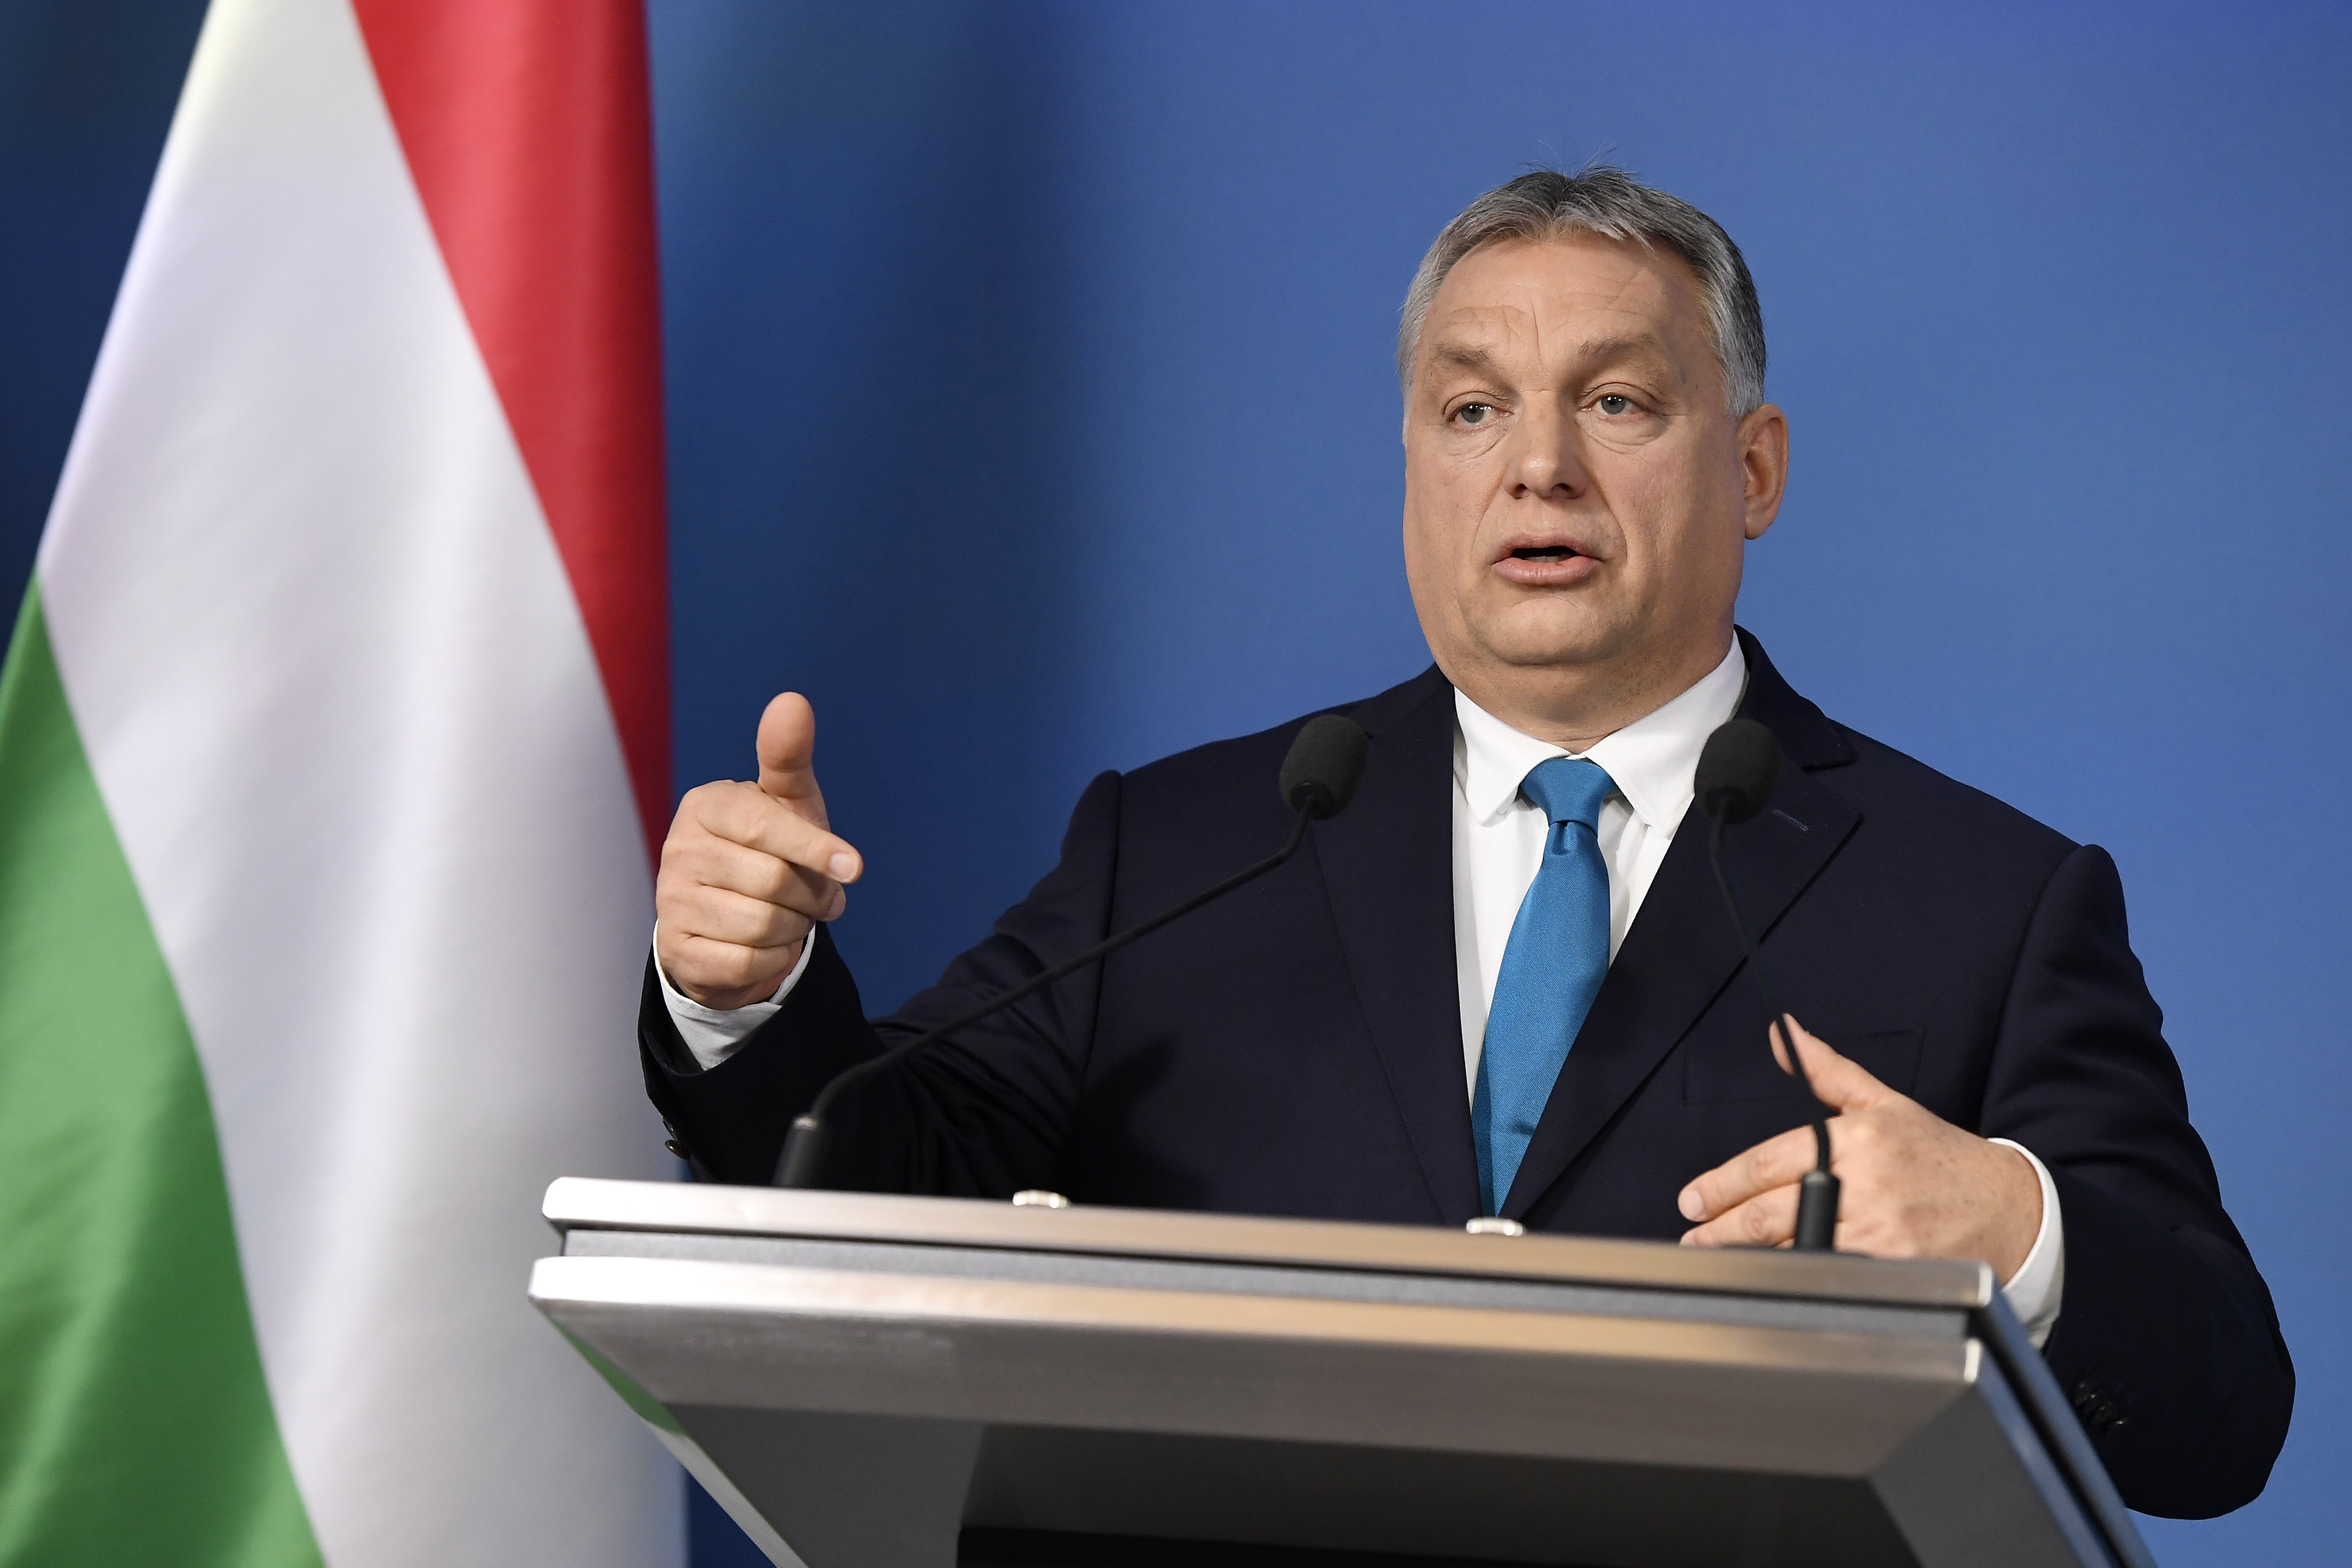 What will shape Hungarian politics in 2019? 